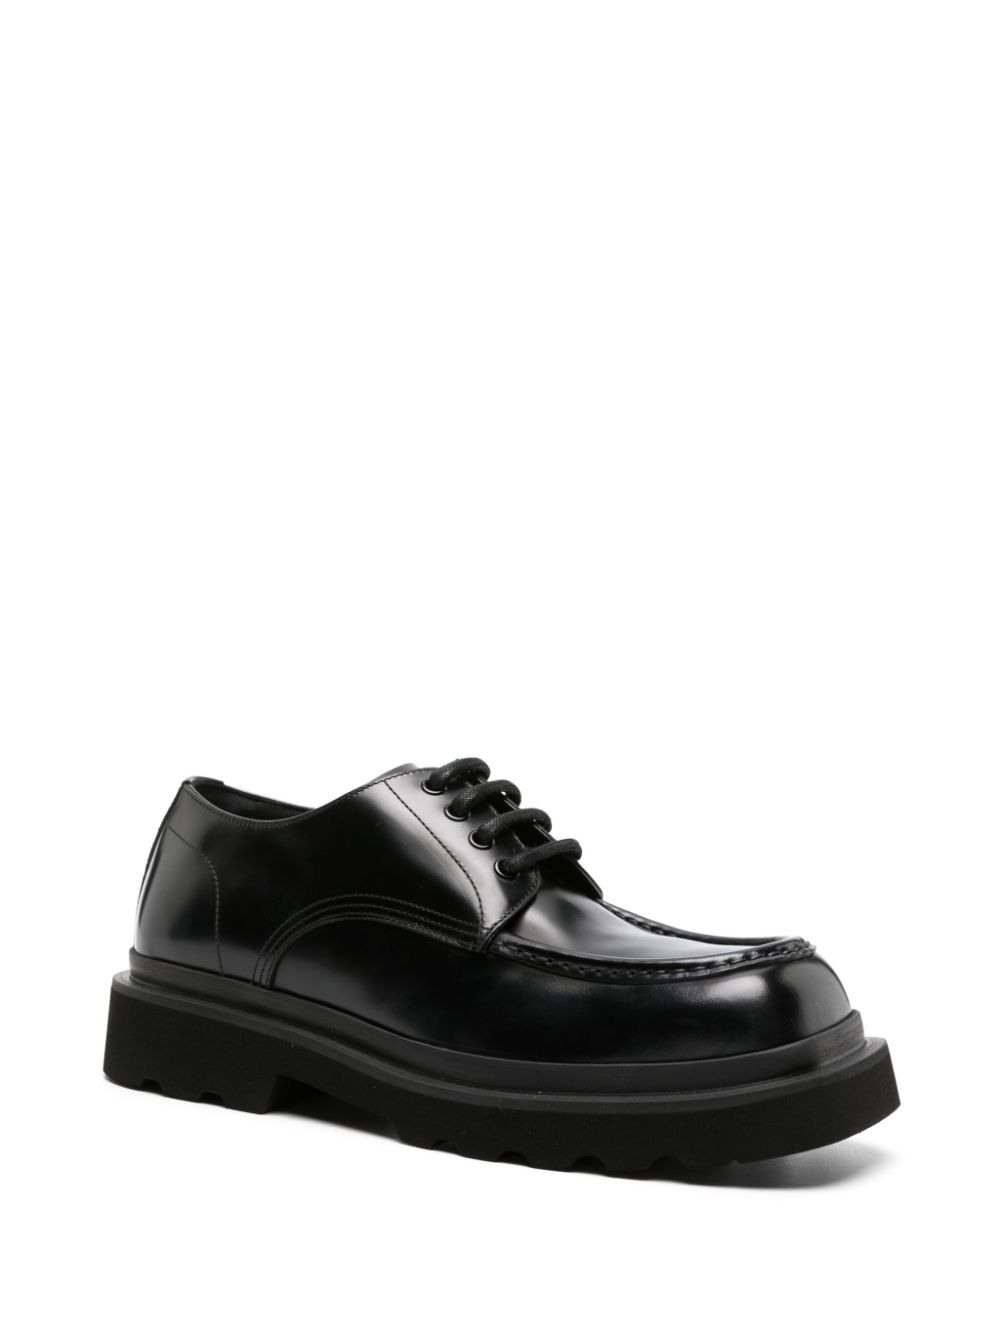 Dolce & Gabbana square-toe leather derby shoes - Zwart